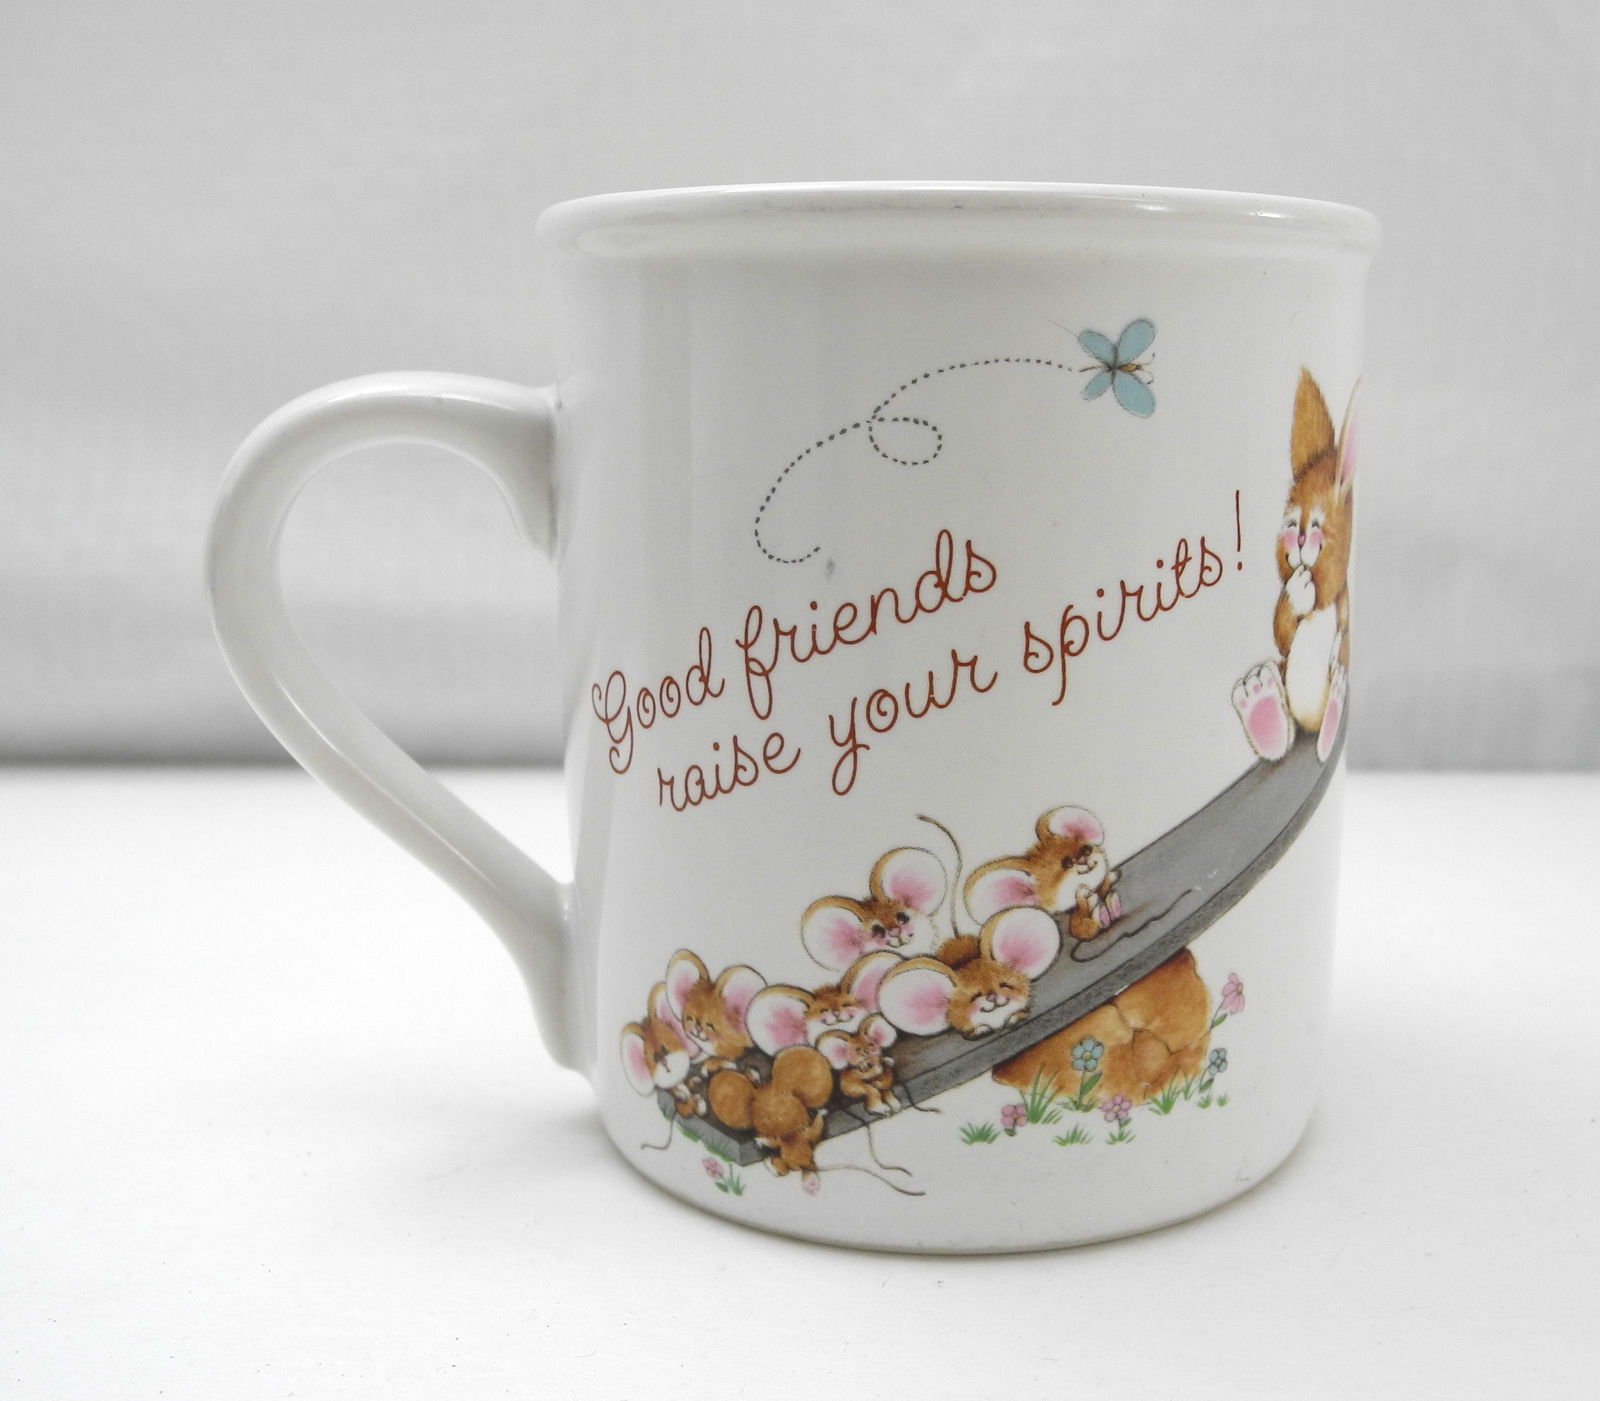 Primary image for Good Friends Raise Your Spirits! Cute Bunny/Mice Mug - Coffee Cup by Hallmark